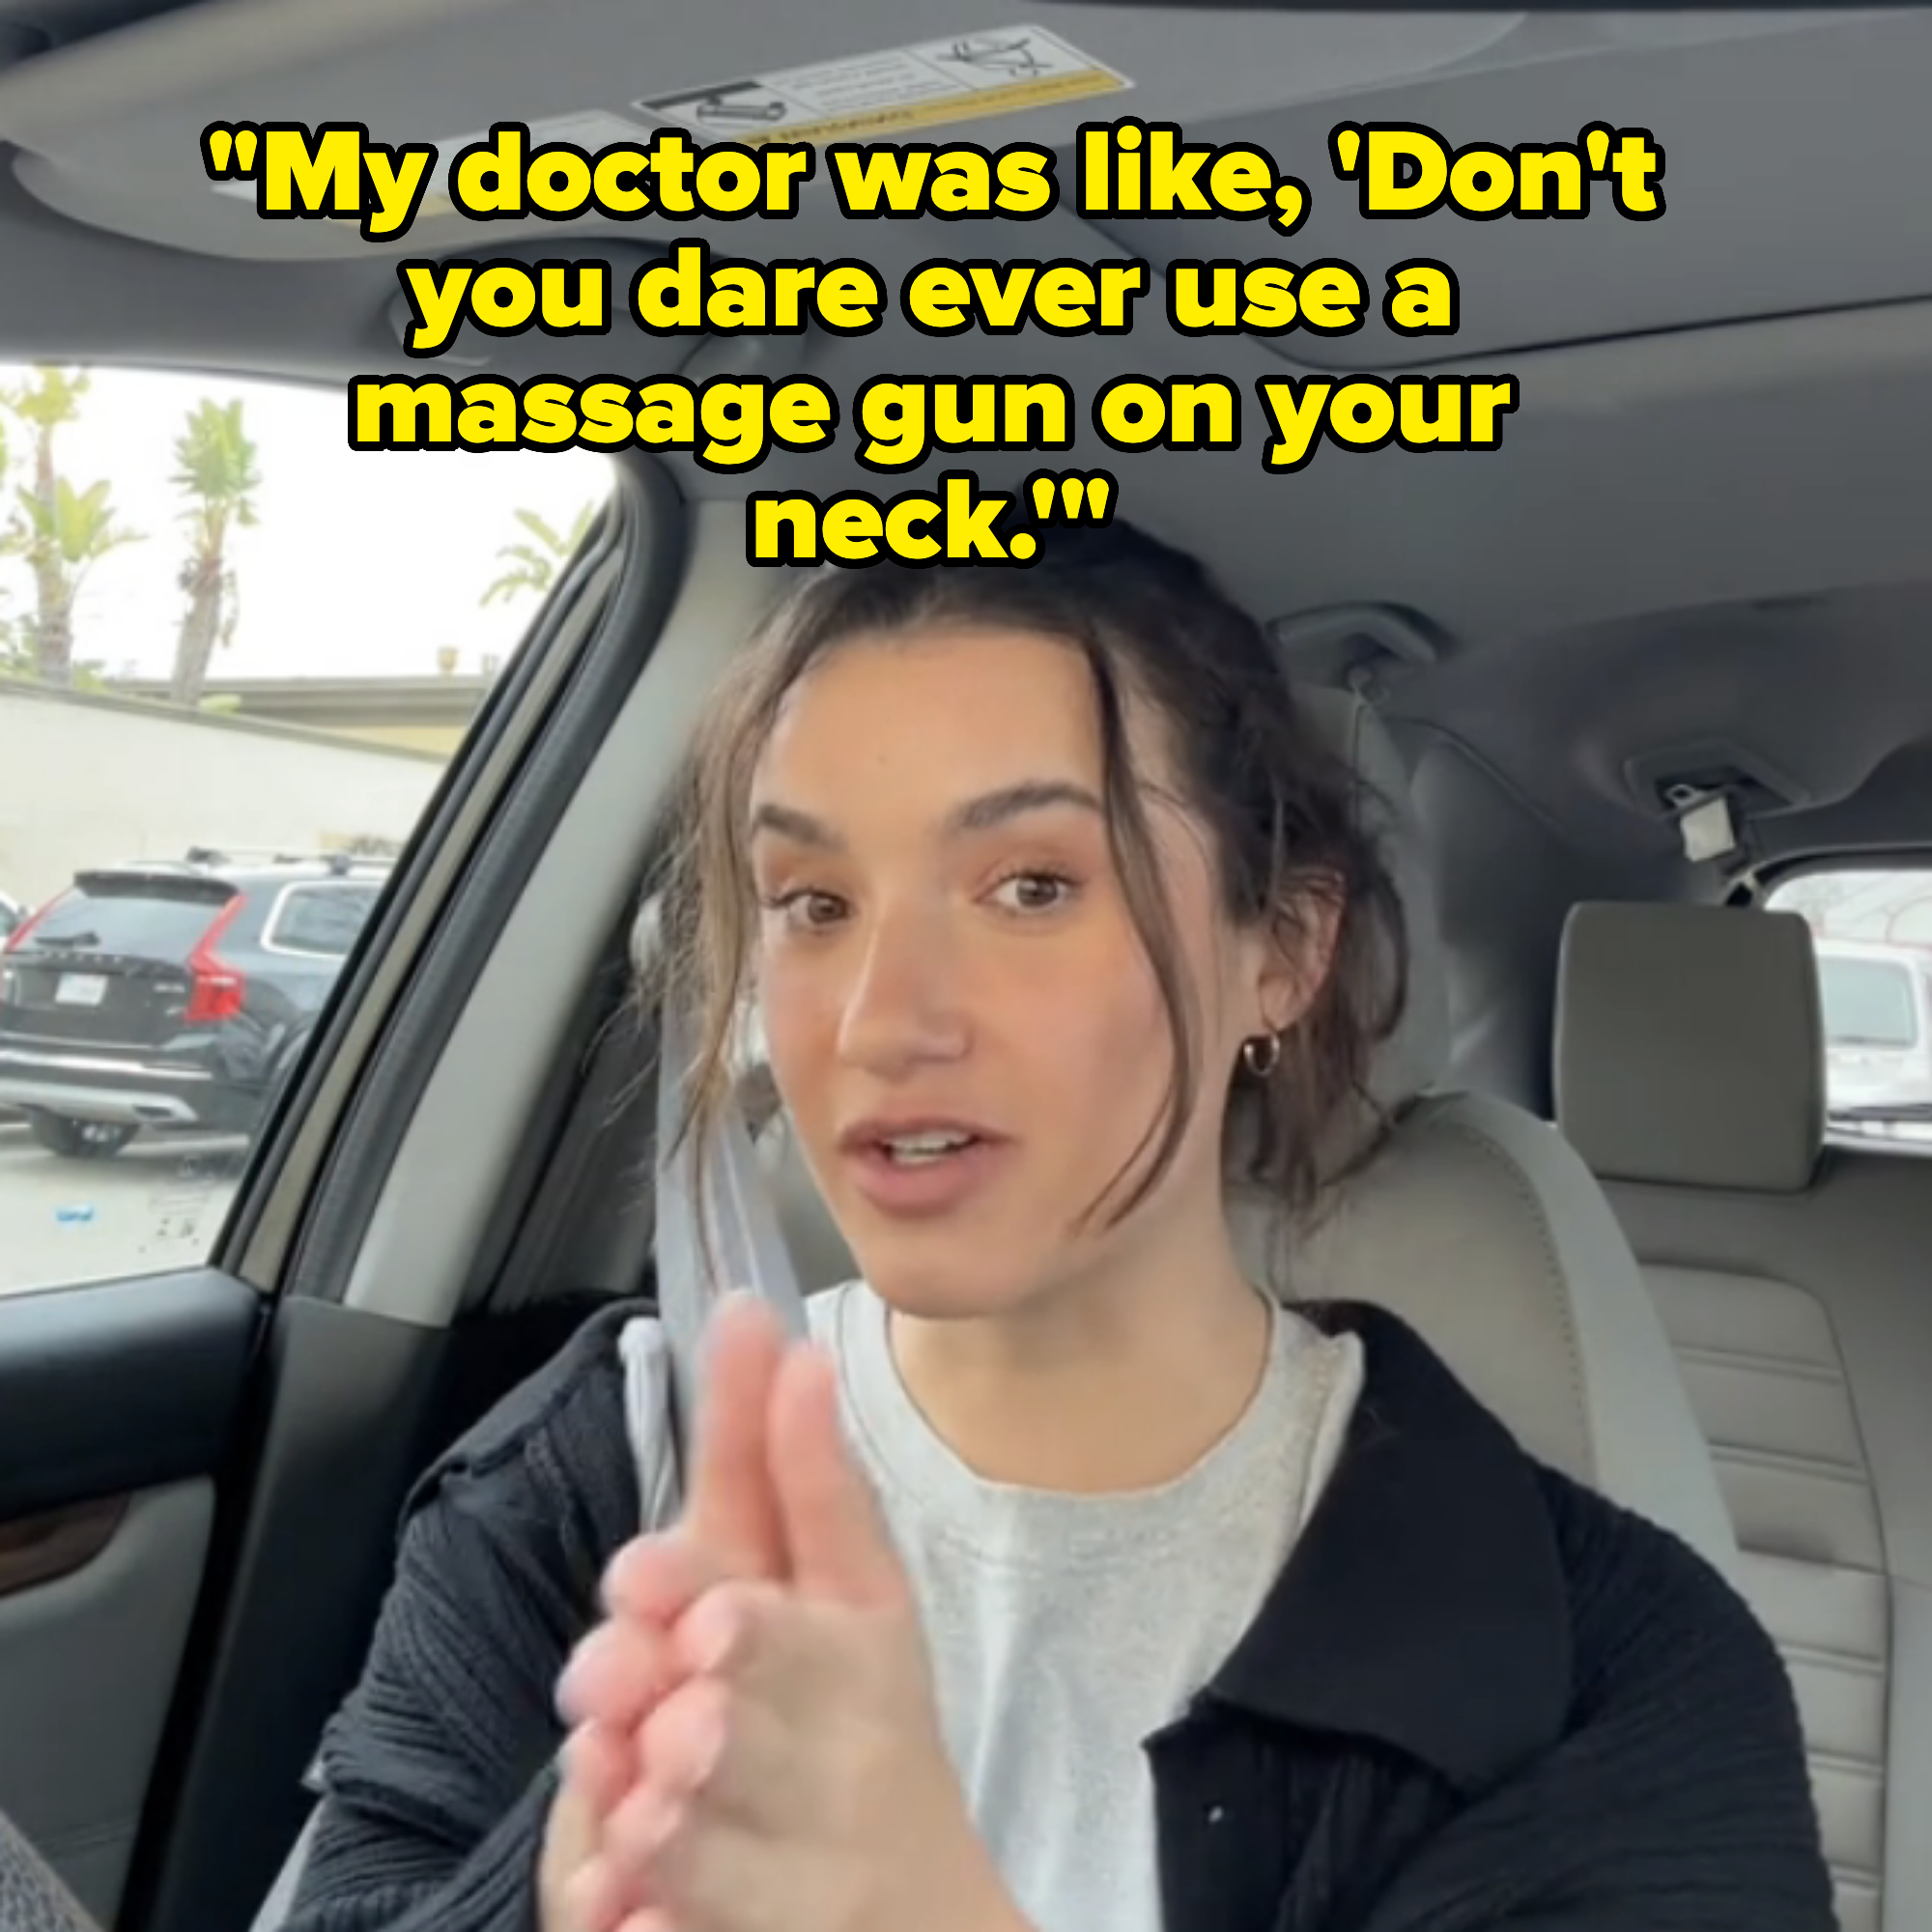 Image of Sophie talking with caption &quot;My doctor was like, &#x27;Don&#x27;t you dare ever use a massage gun on your neck.&quot;